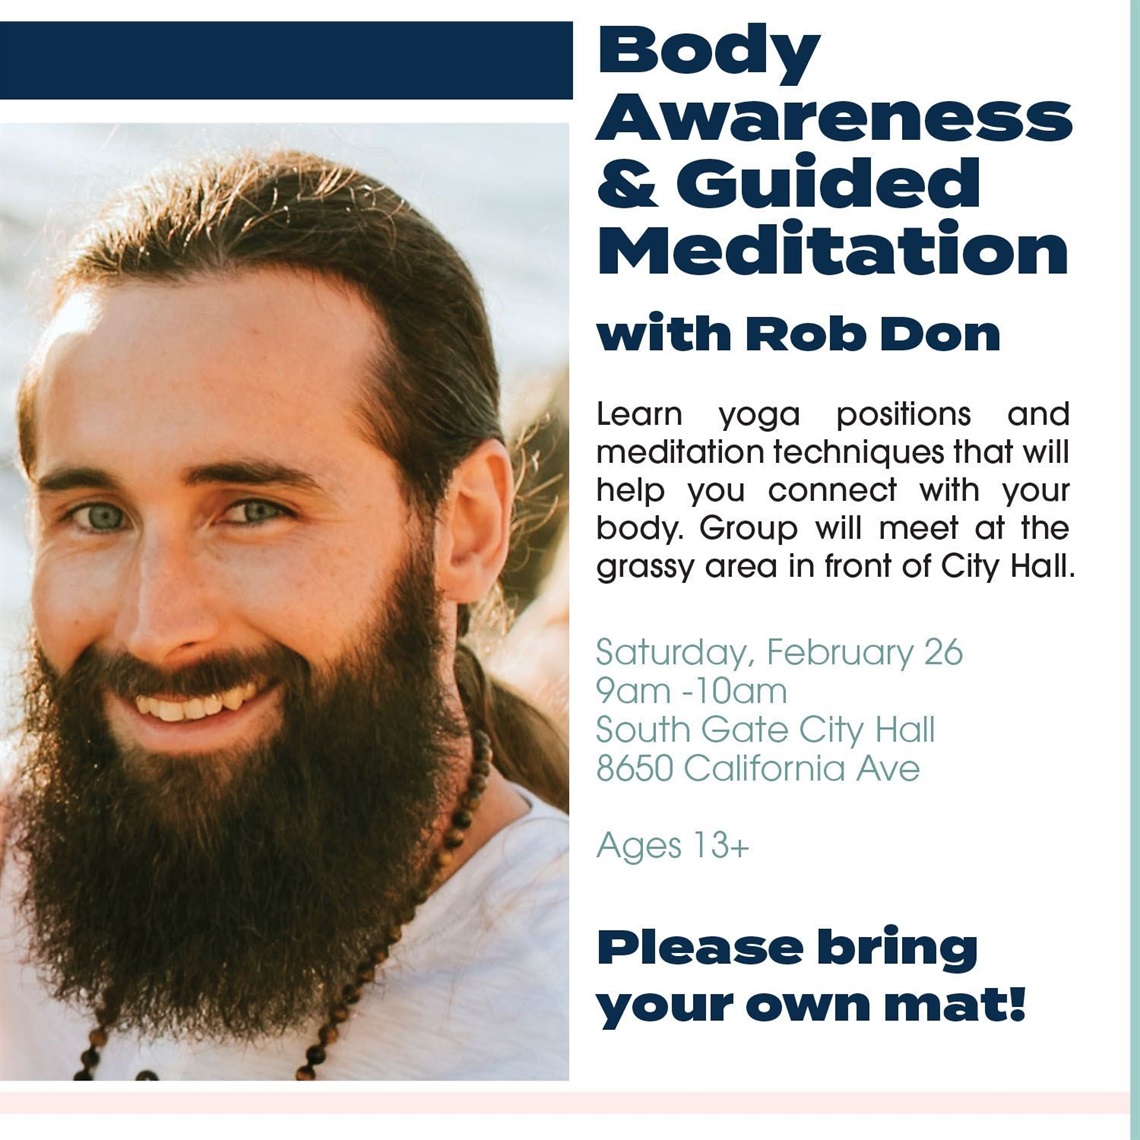 Body-Awareness-and-Guided-Meditation-with-Rob-Don.jpg